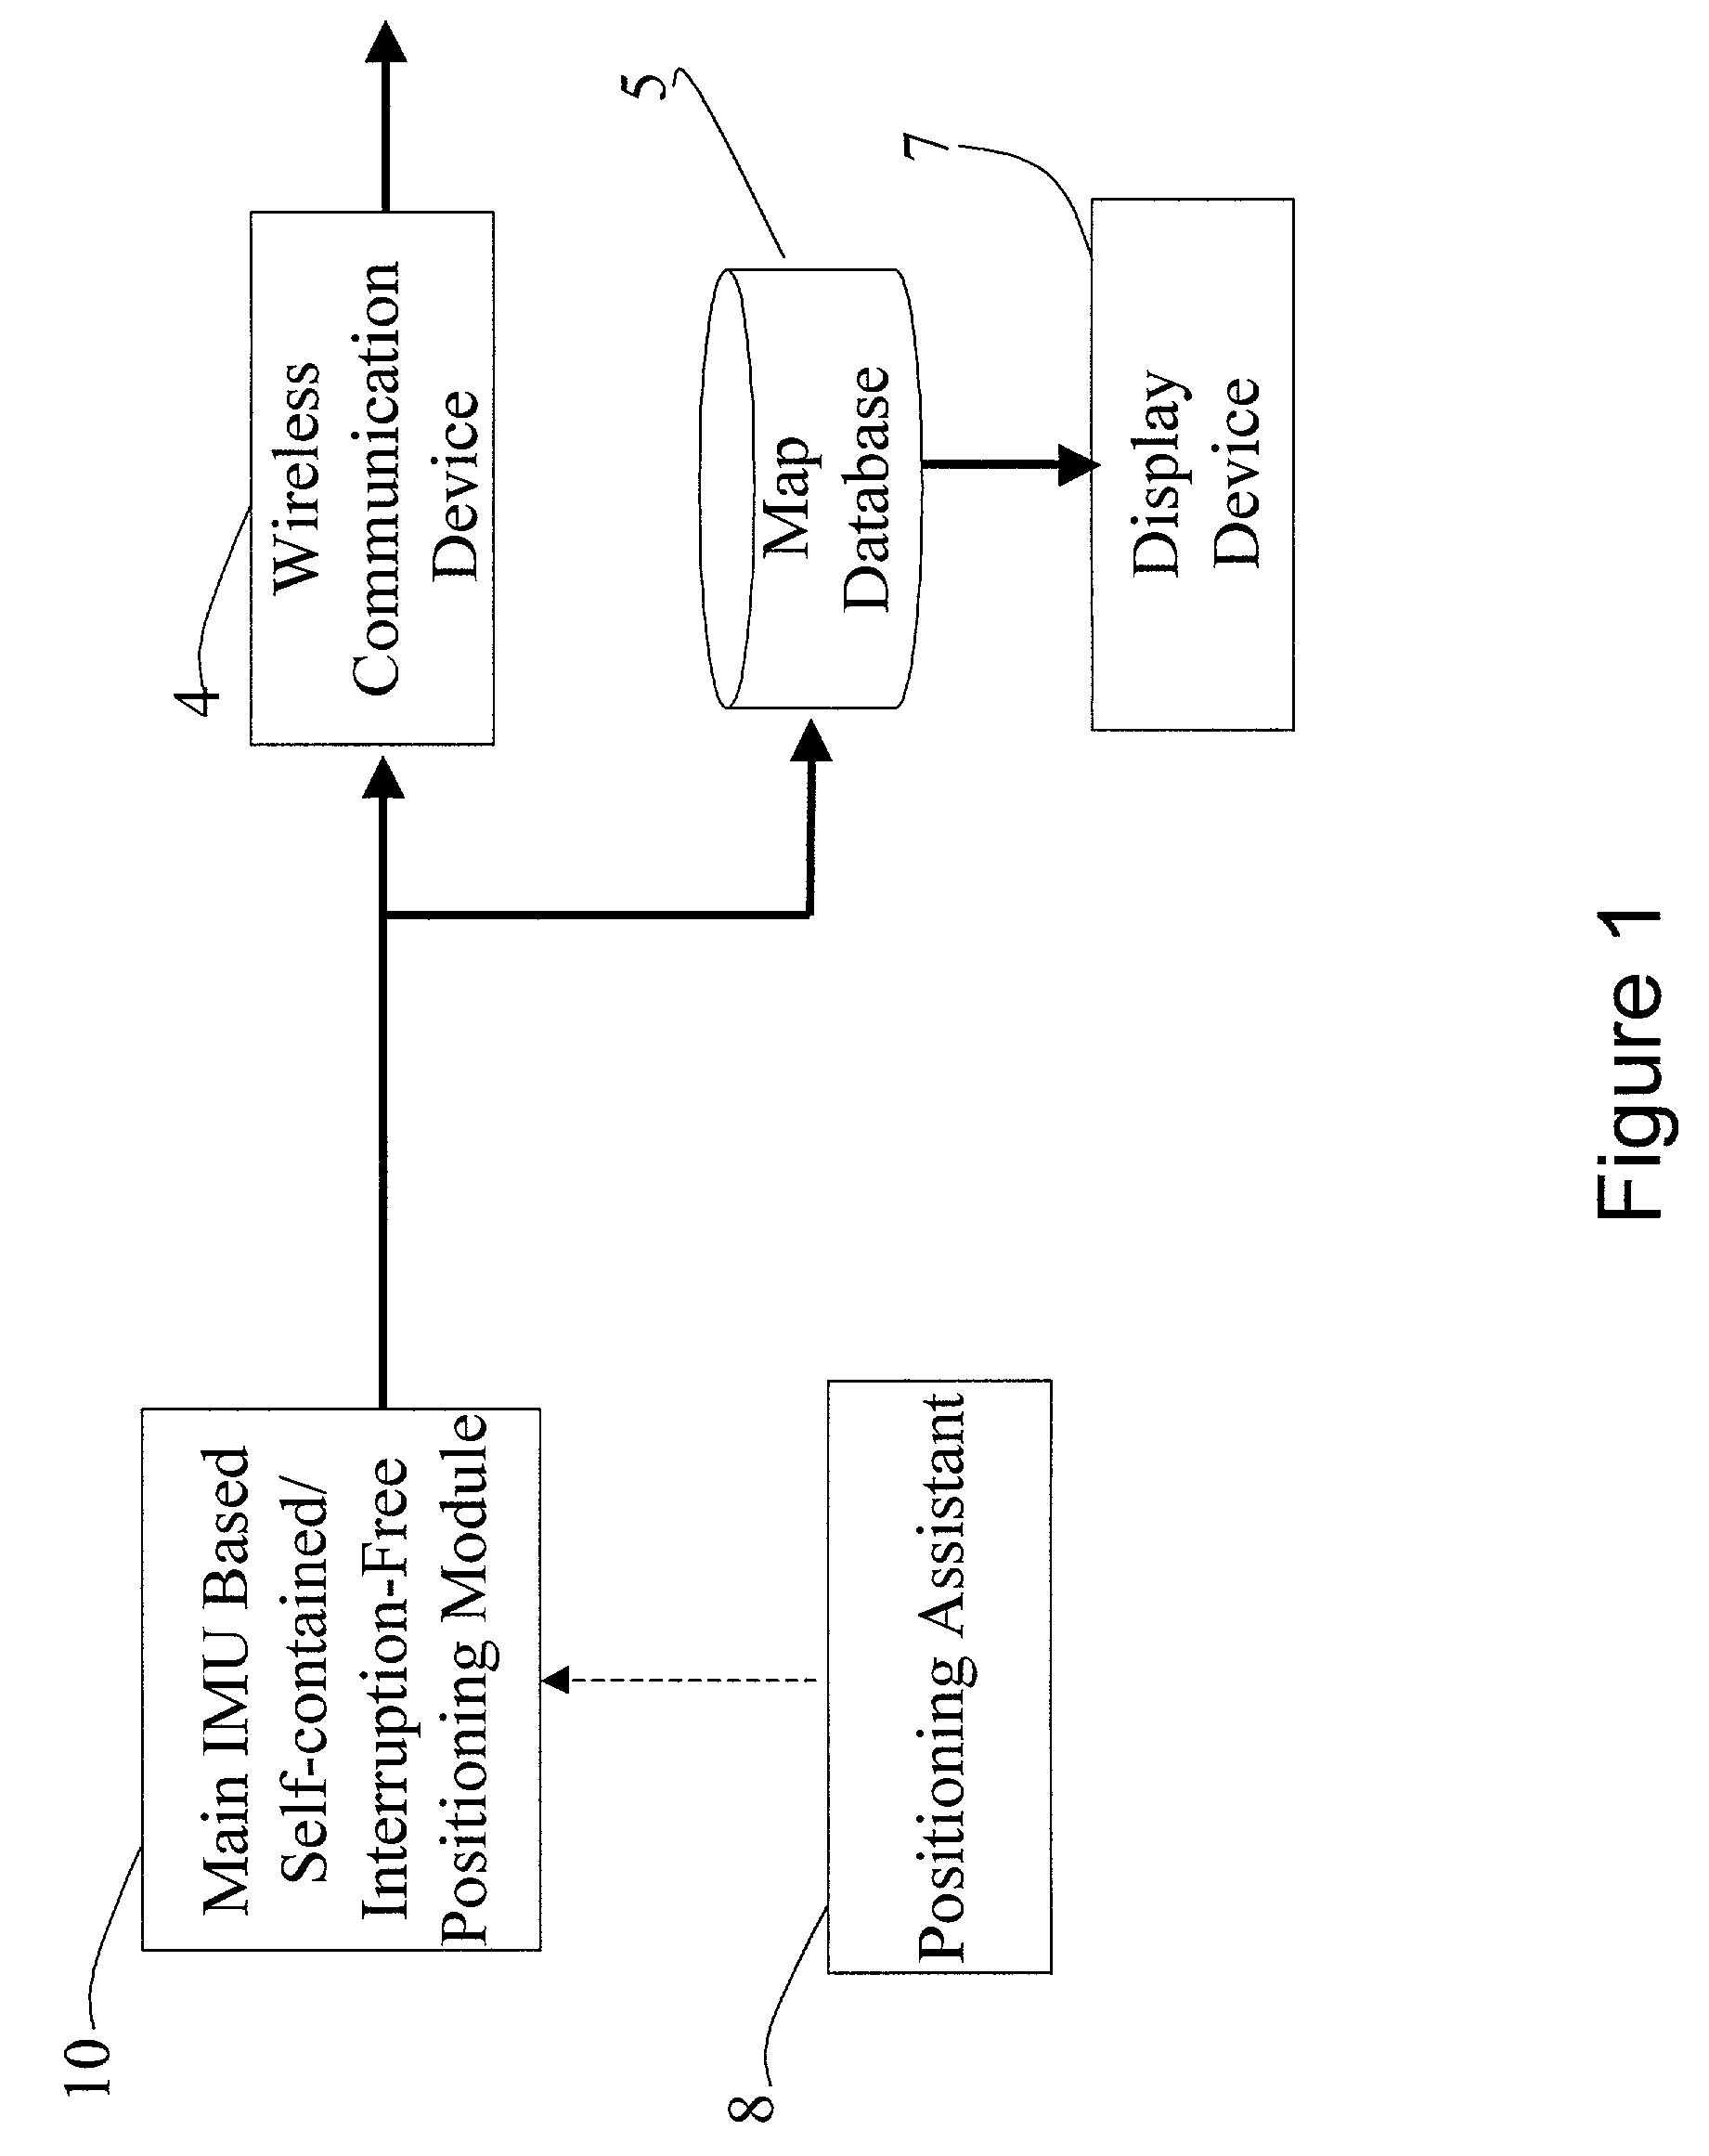 Self-contained/interruption-free positioning method and system thereof